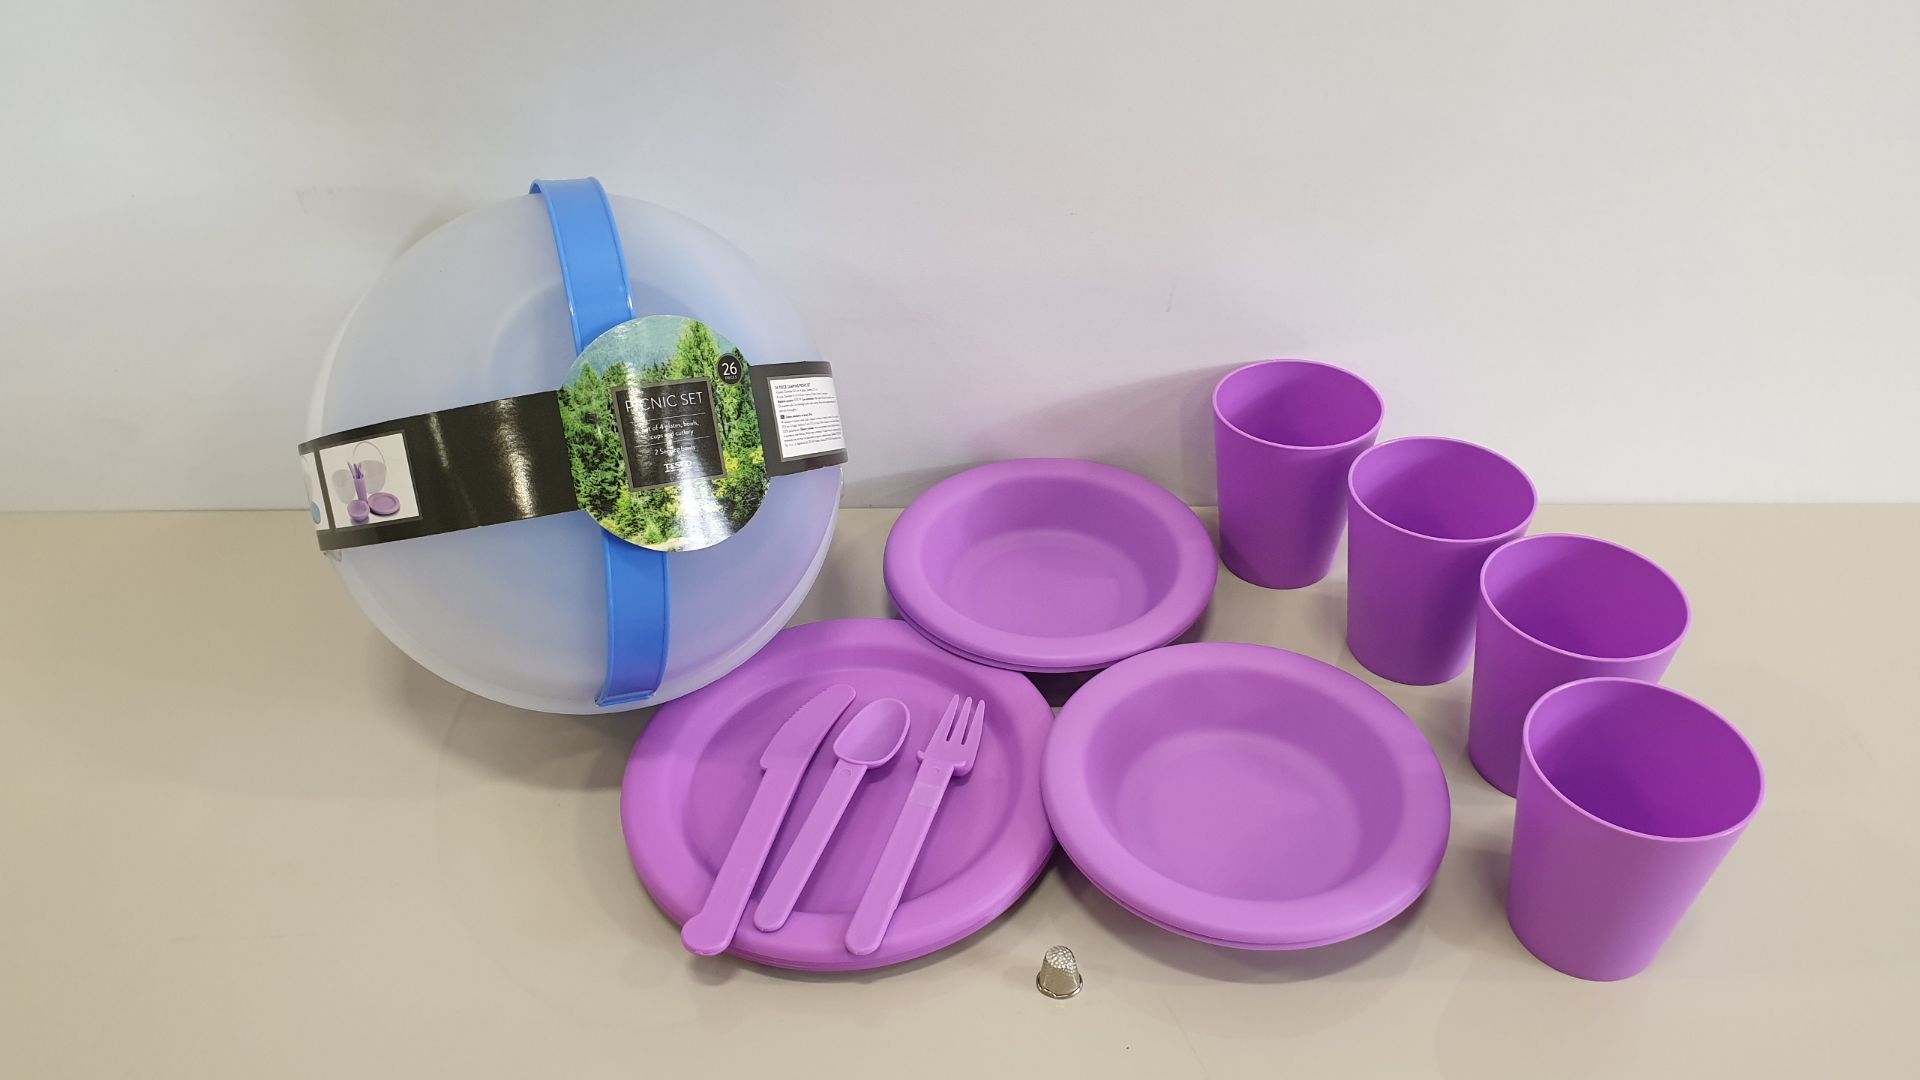 16 X 26 PC PICNIC / CAMPING SETS (IE. 4 CUPS, 4 PLATES, 4 BOWLS, 4 X 3 PC CUTLERY PLUS 2 BOWLS) - IN